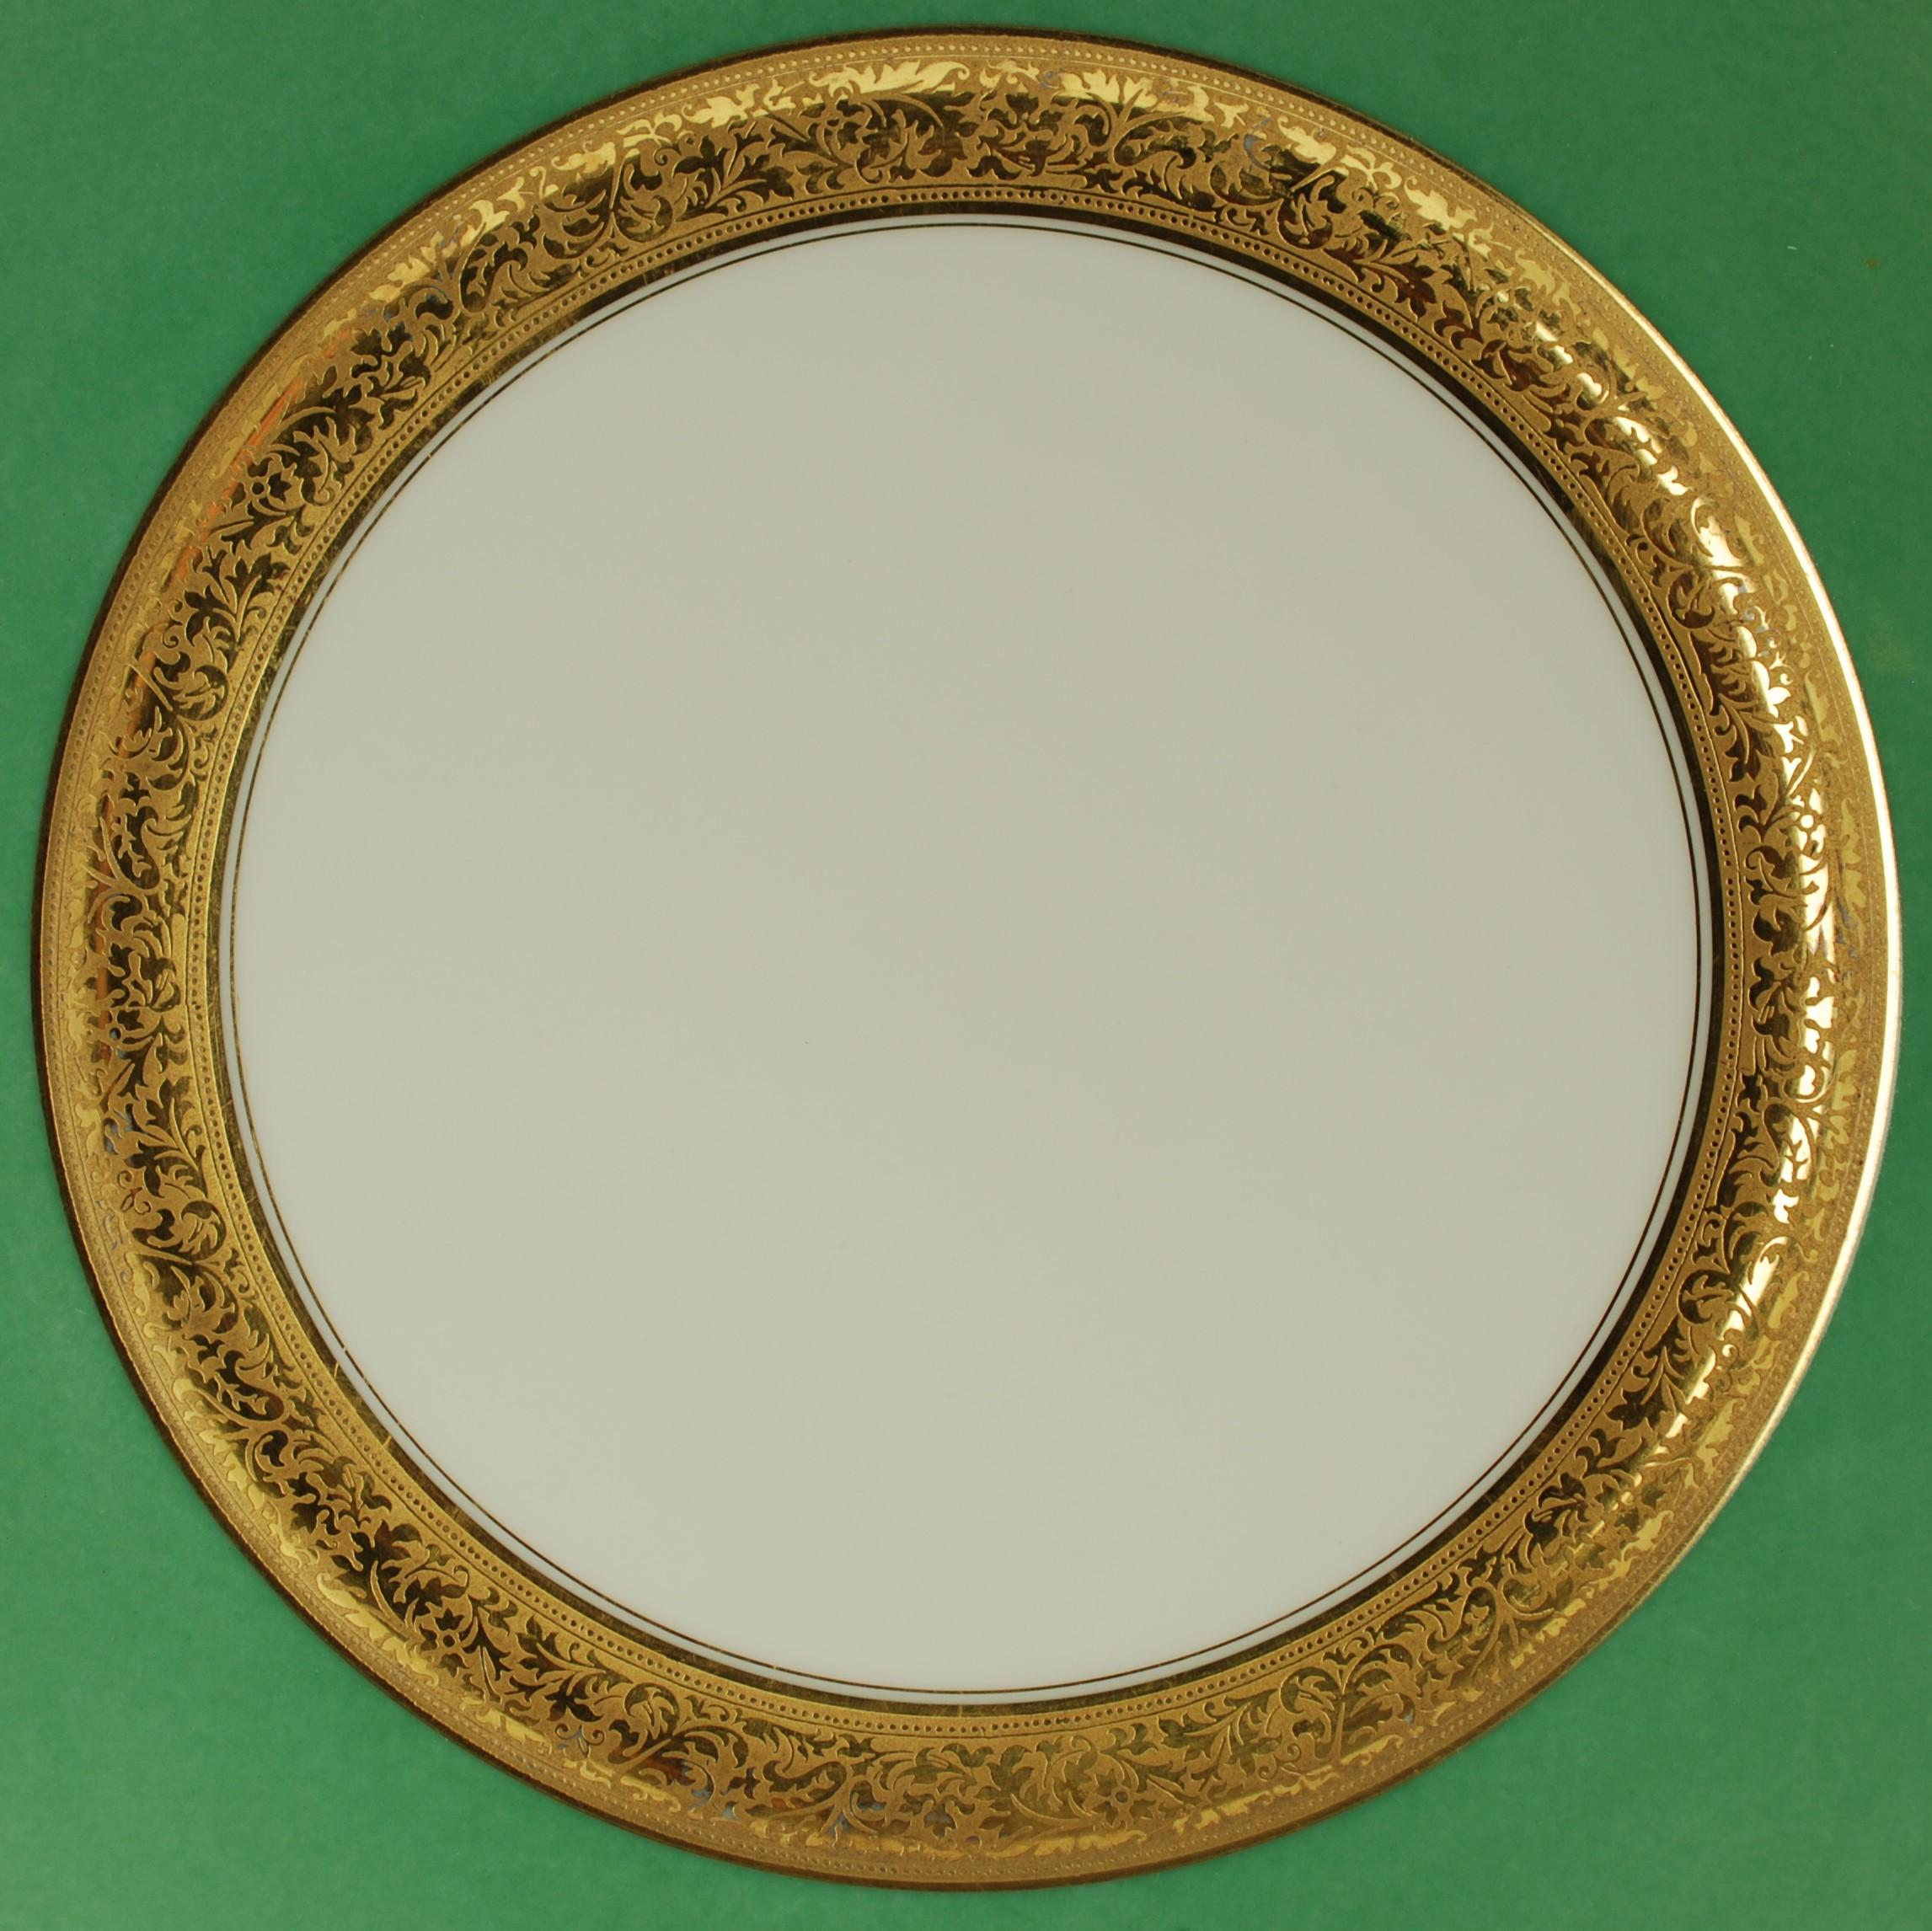 These late 19th century Limoges porcelain dinner plates were made and decorated by highly regarded French porcelain manufactory Tressemanes & Vogt. The shoulders of the plates feature jade green glaze bordered at the inside with a .75